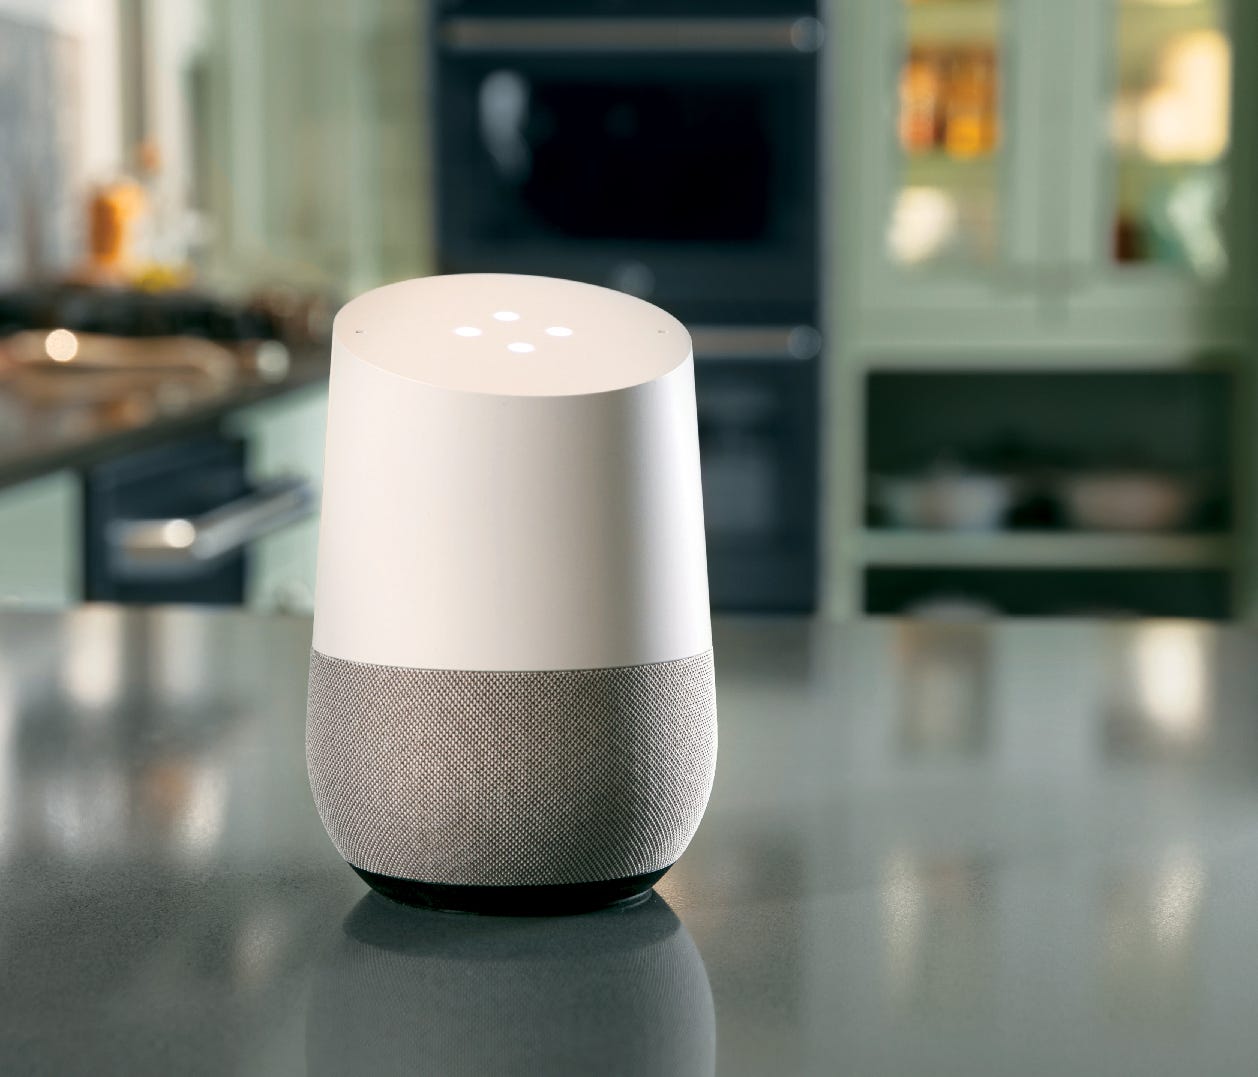 Google Home is invading every room in your house—here's what you need to know